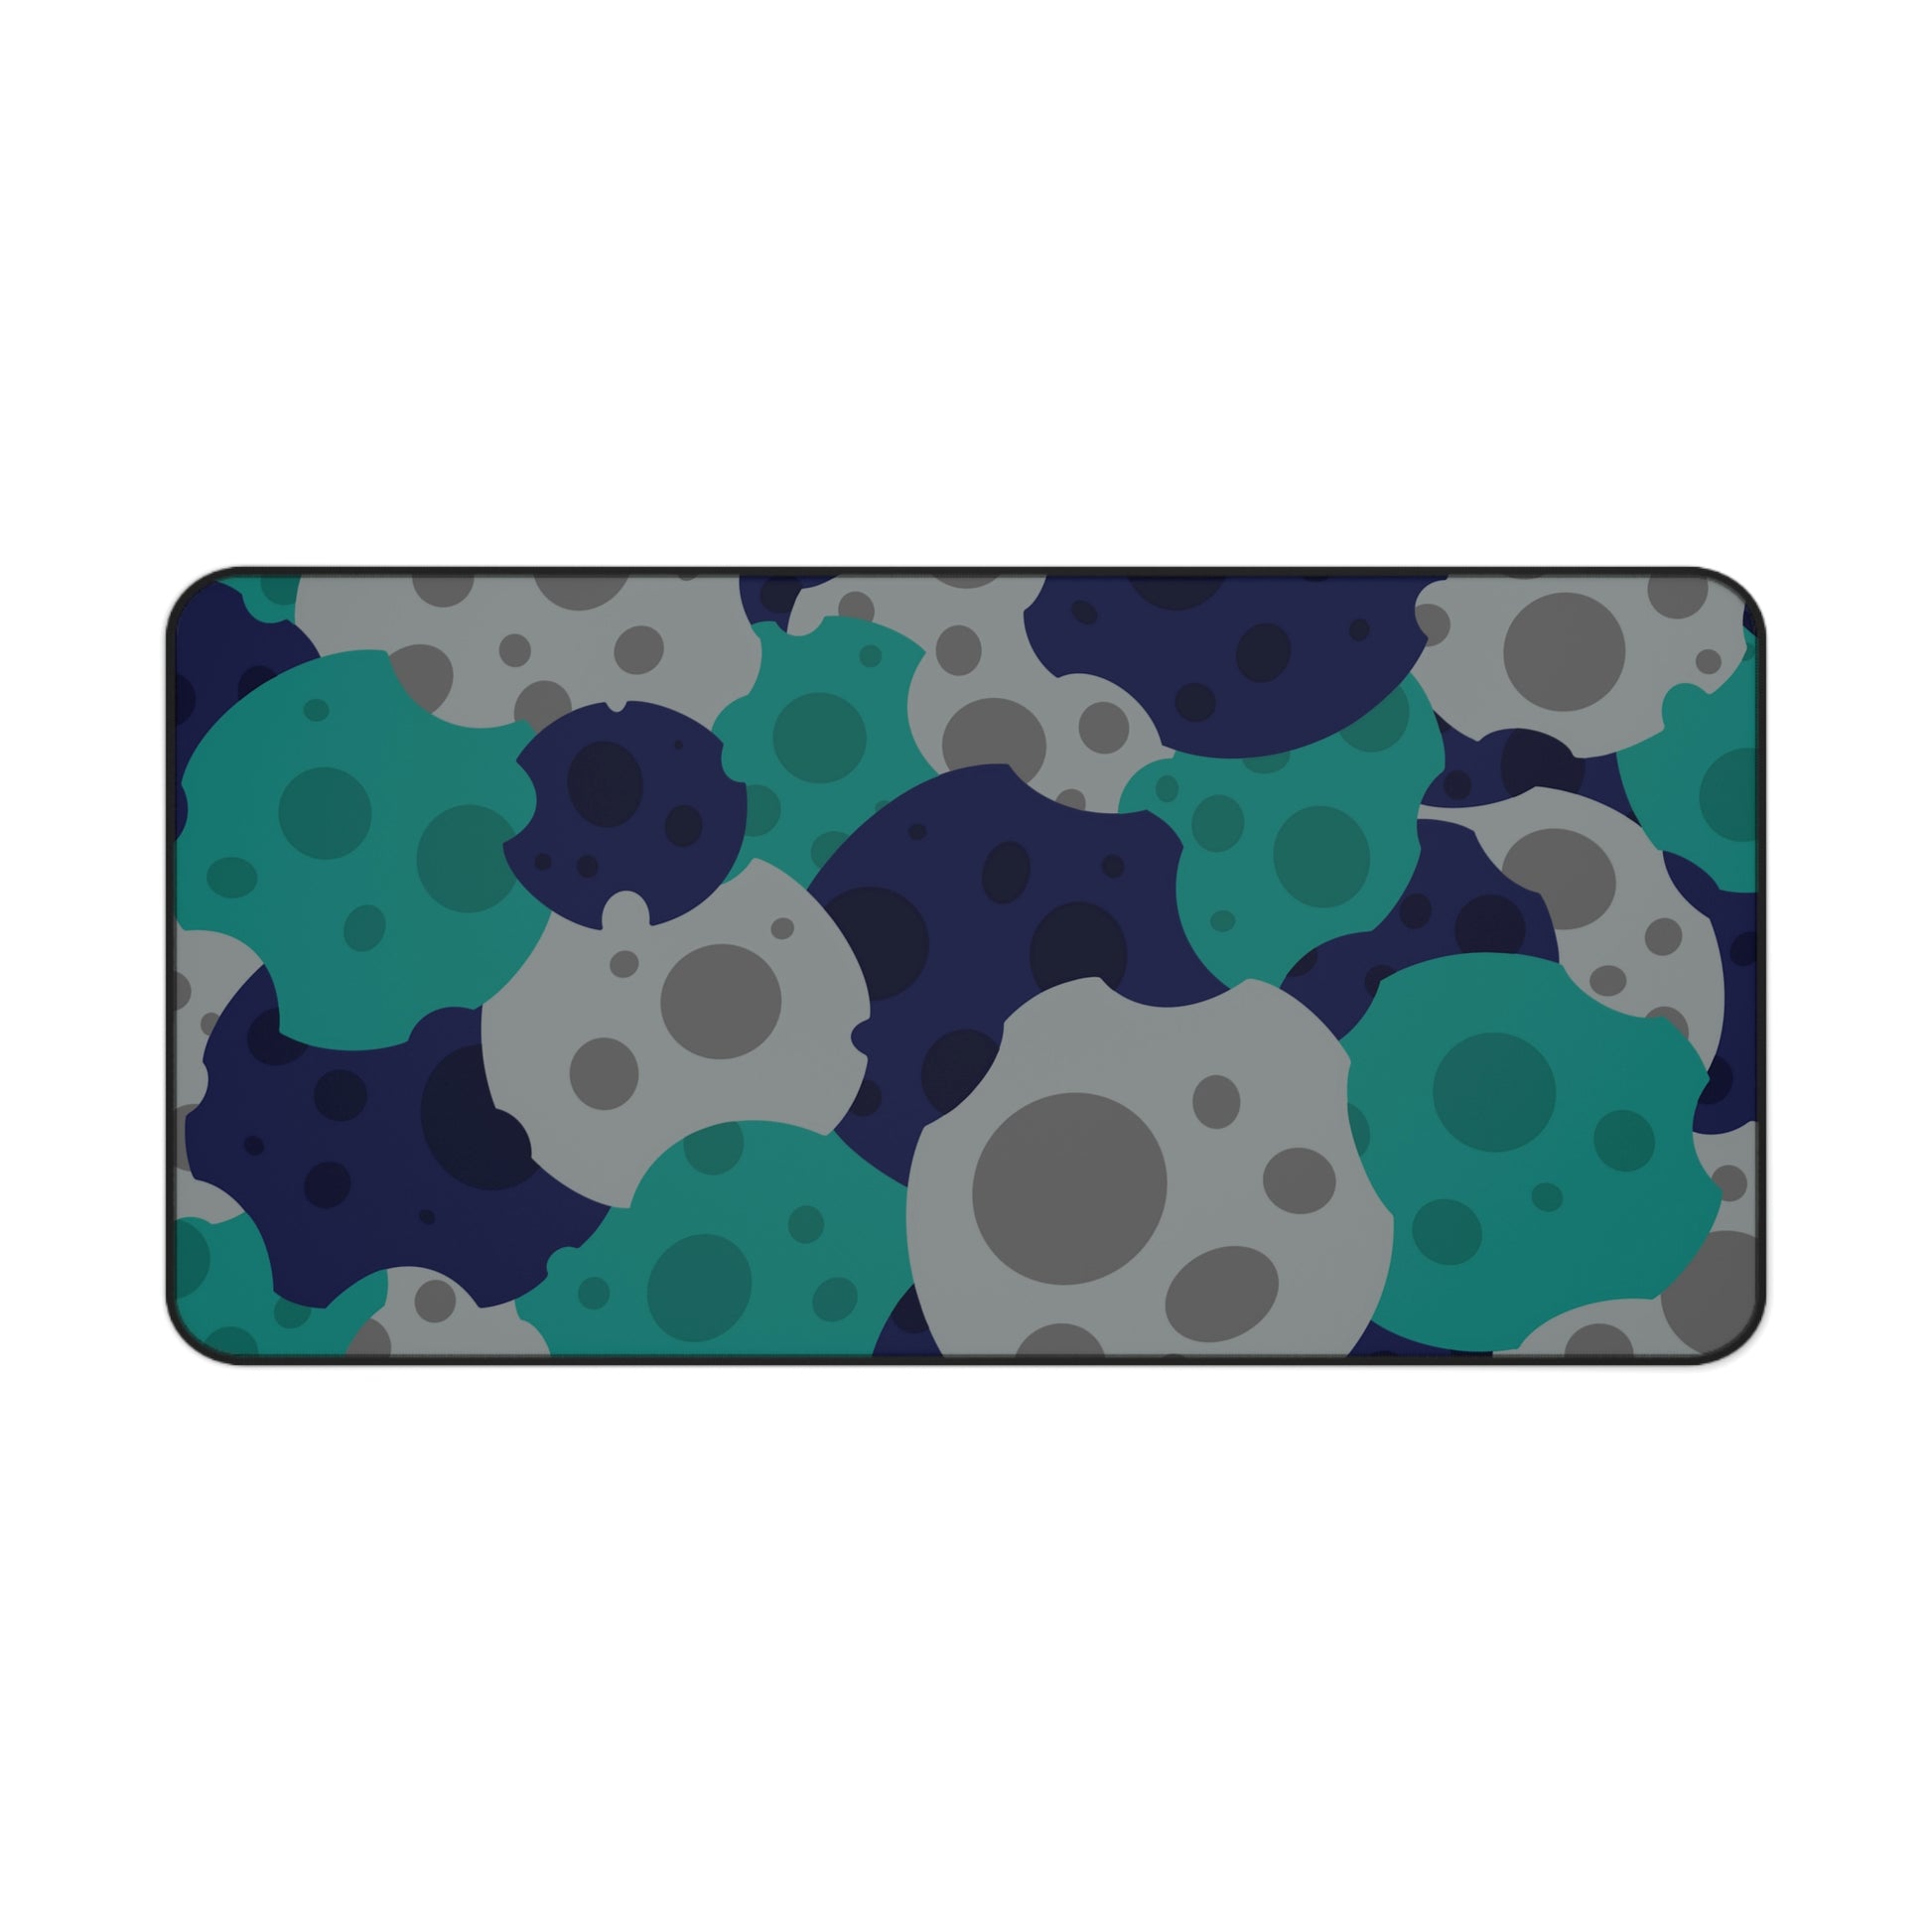 A 31" x 15.5" desk mat with gray, teal, and dark blue meteorites.